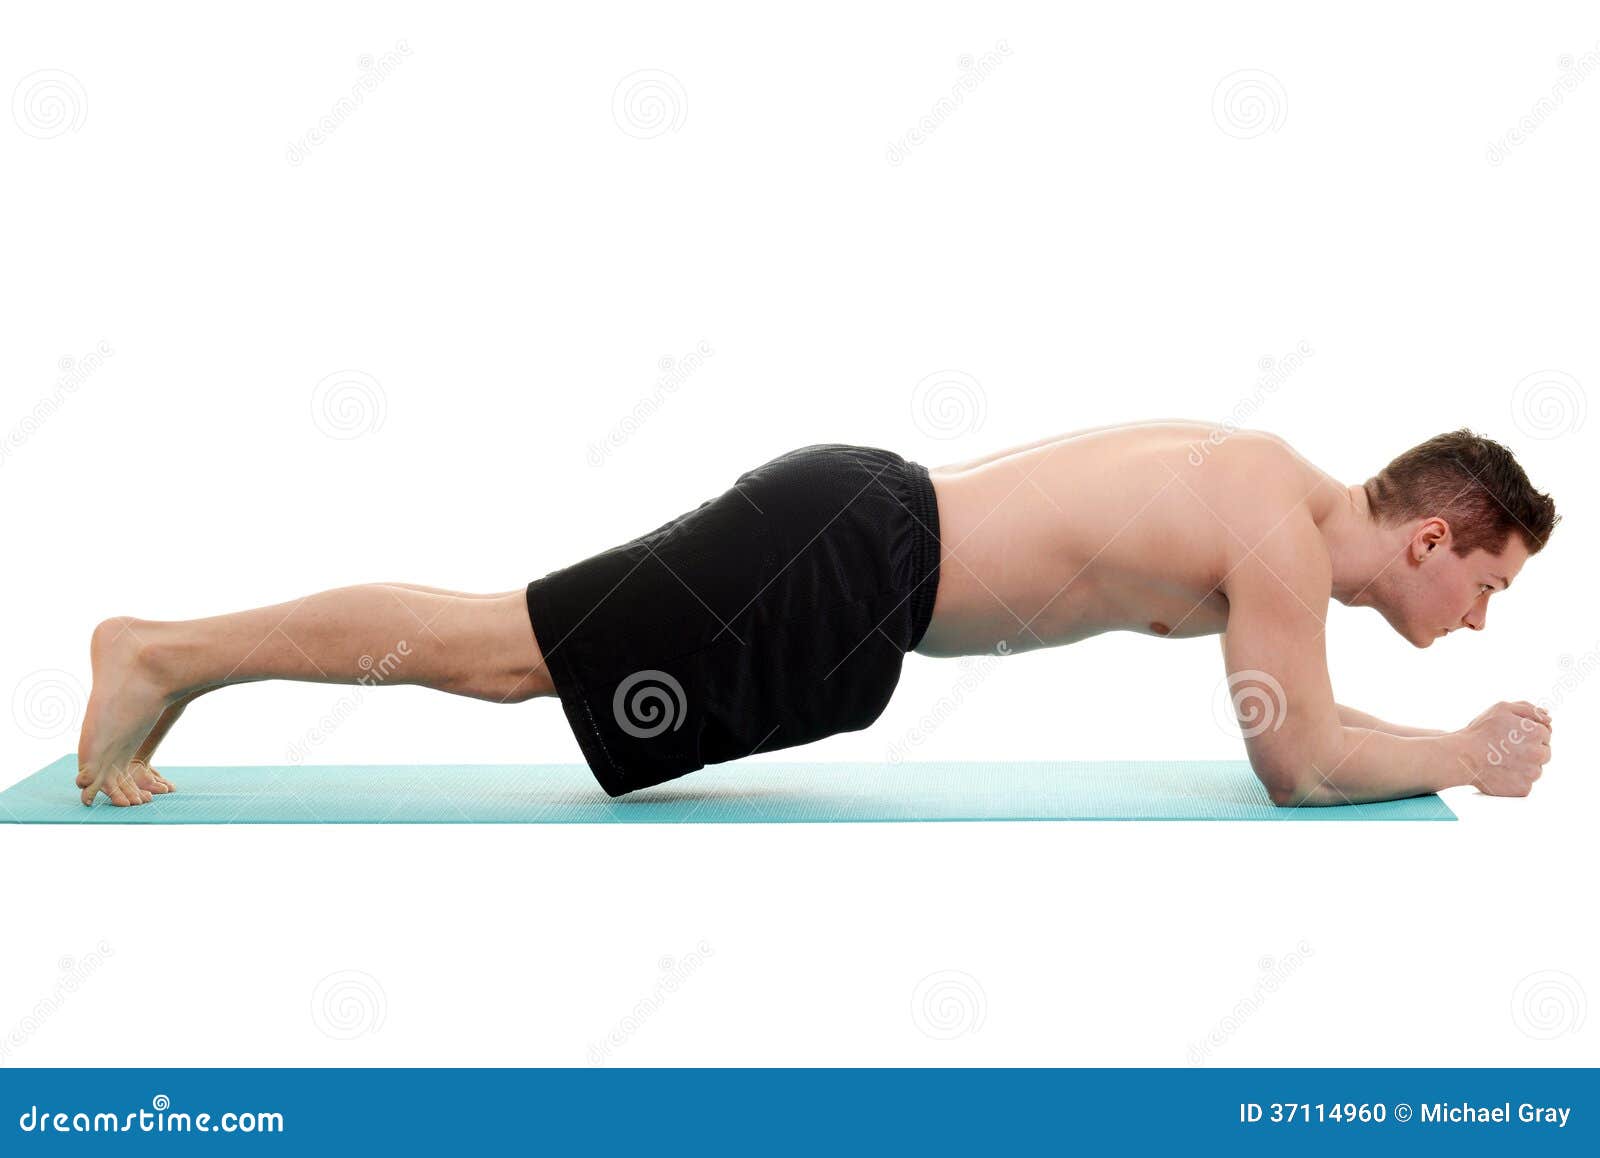 young man doing planking exercise